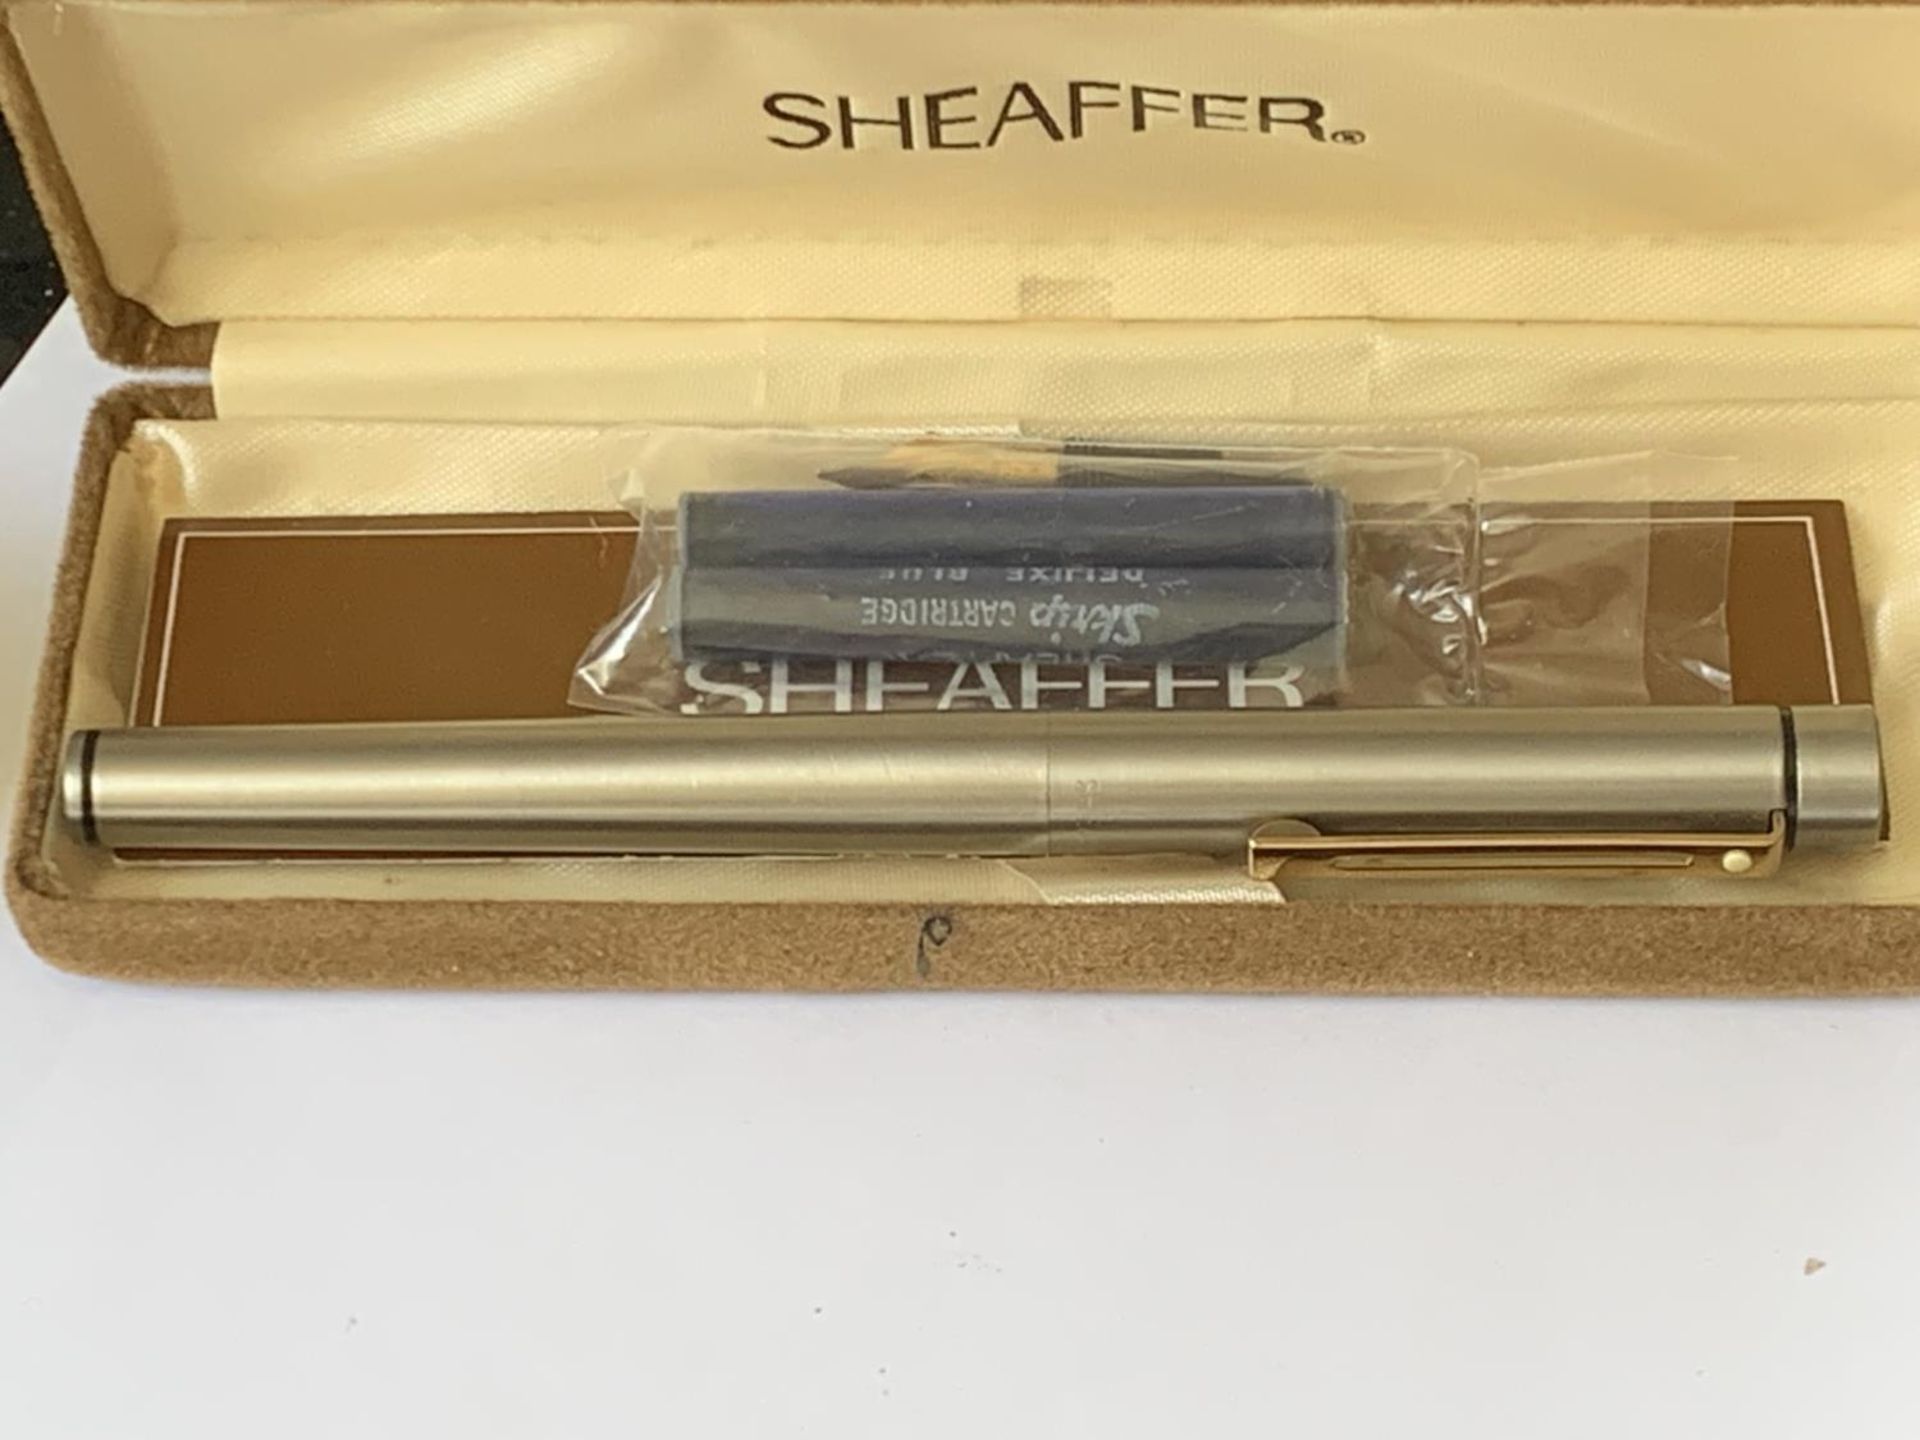 A BOXED SHEAFFER FOUNTAIN PEN WITH 14K NIB - Image 3 of 3